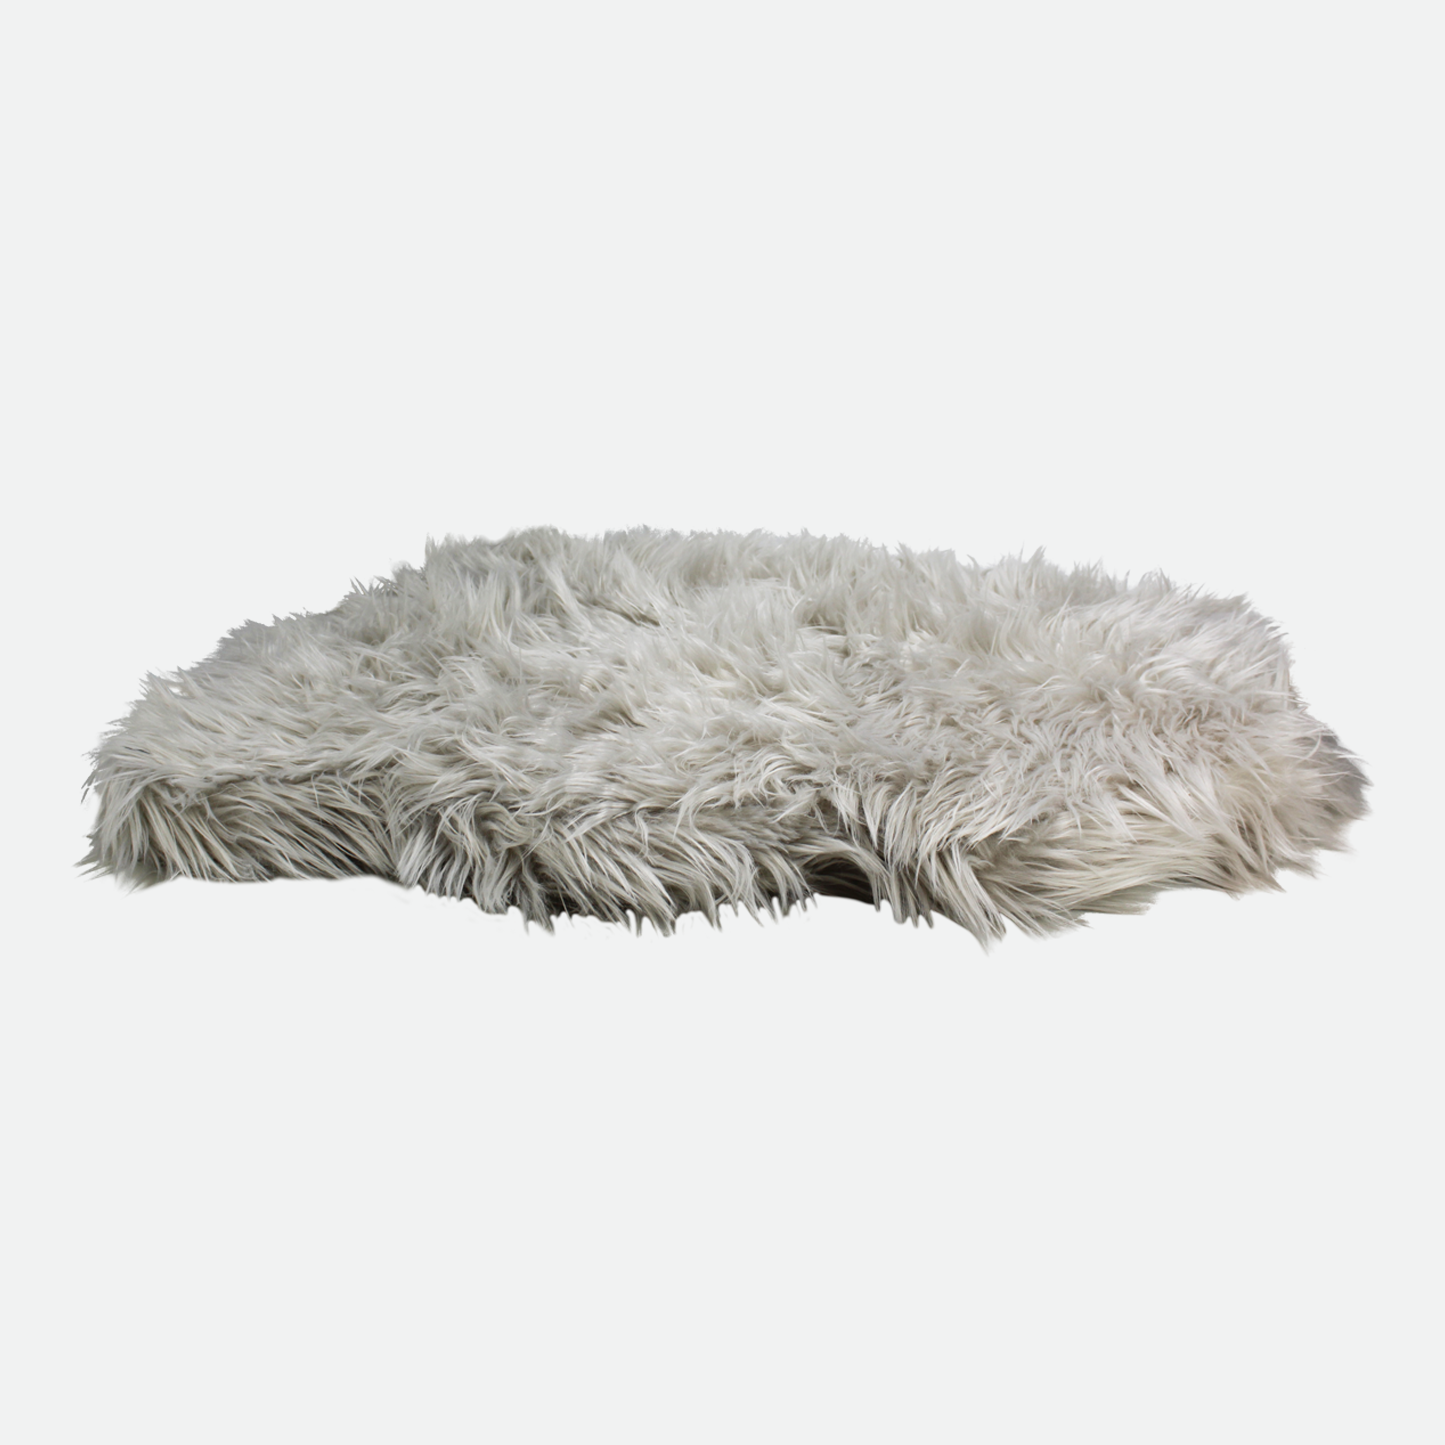 Faux fur dog bed, gray